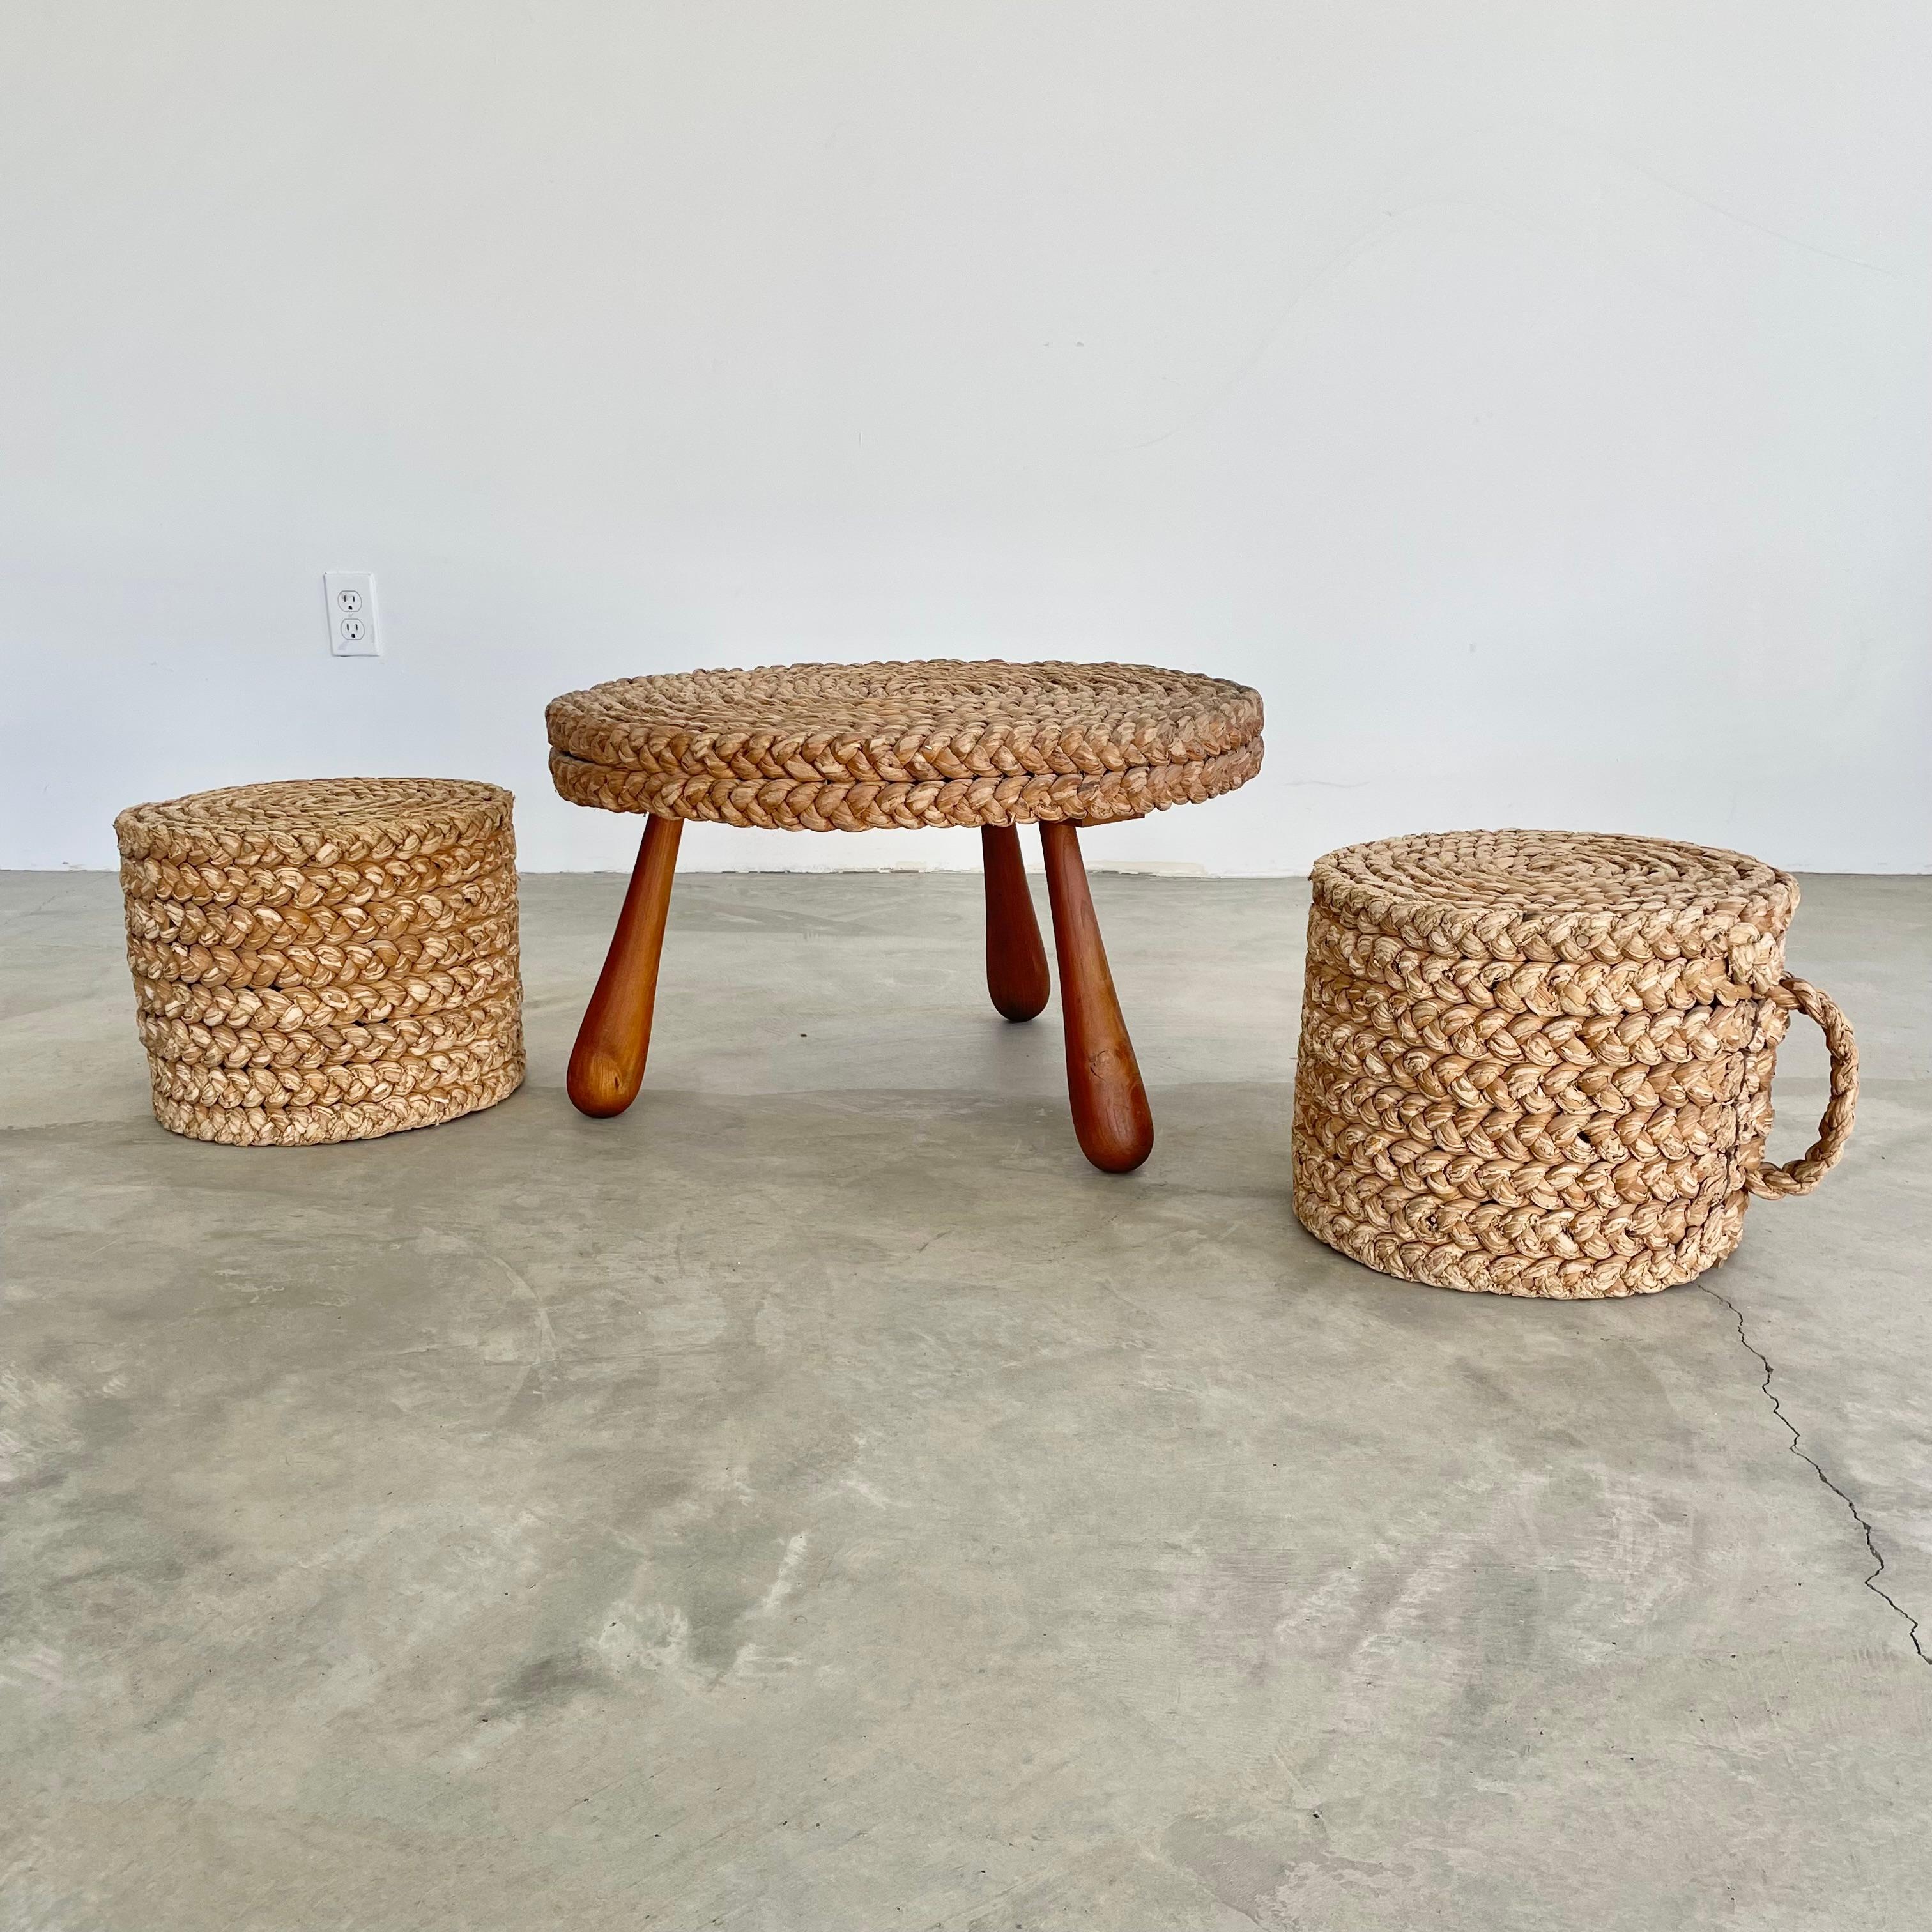 Unique tripod rope and wood table with two matching rope drum stools with woven handles. Cork table covered in rope sitting atop three sculptural club legs. Low profile set with amazing presence. Perfect indoors or in a covered patio. Rope is woven